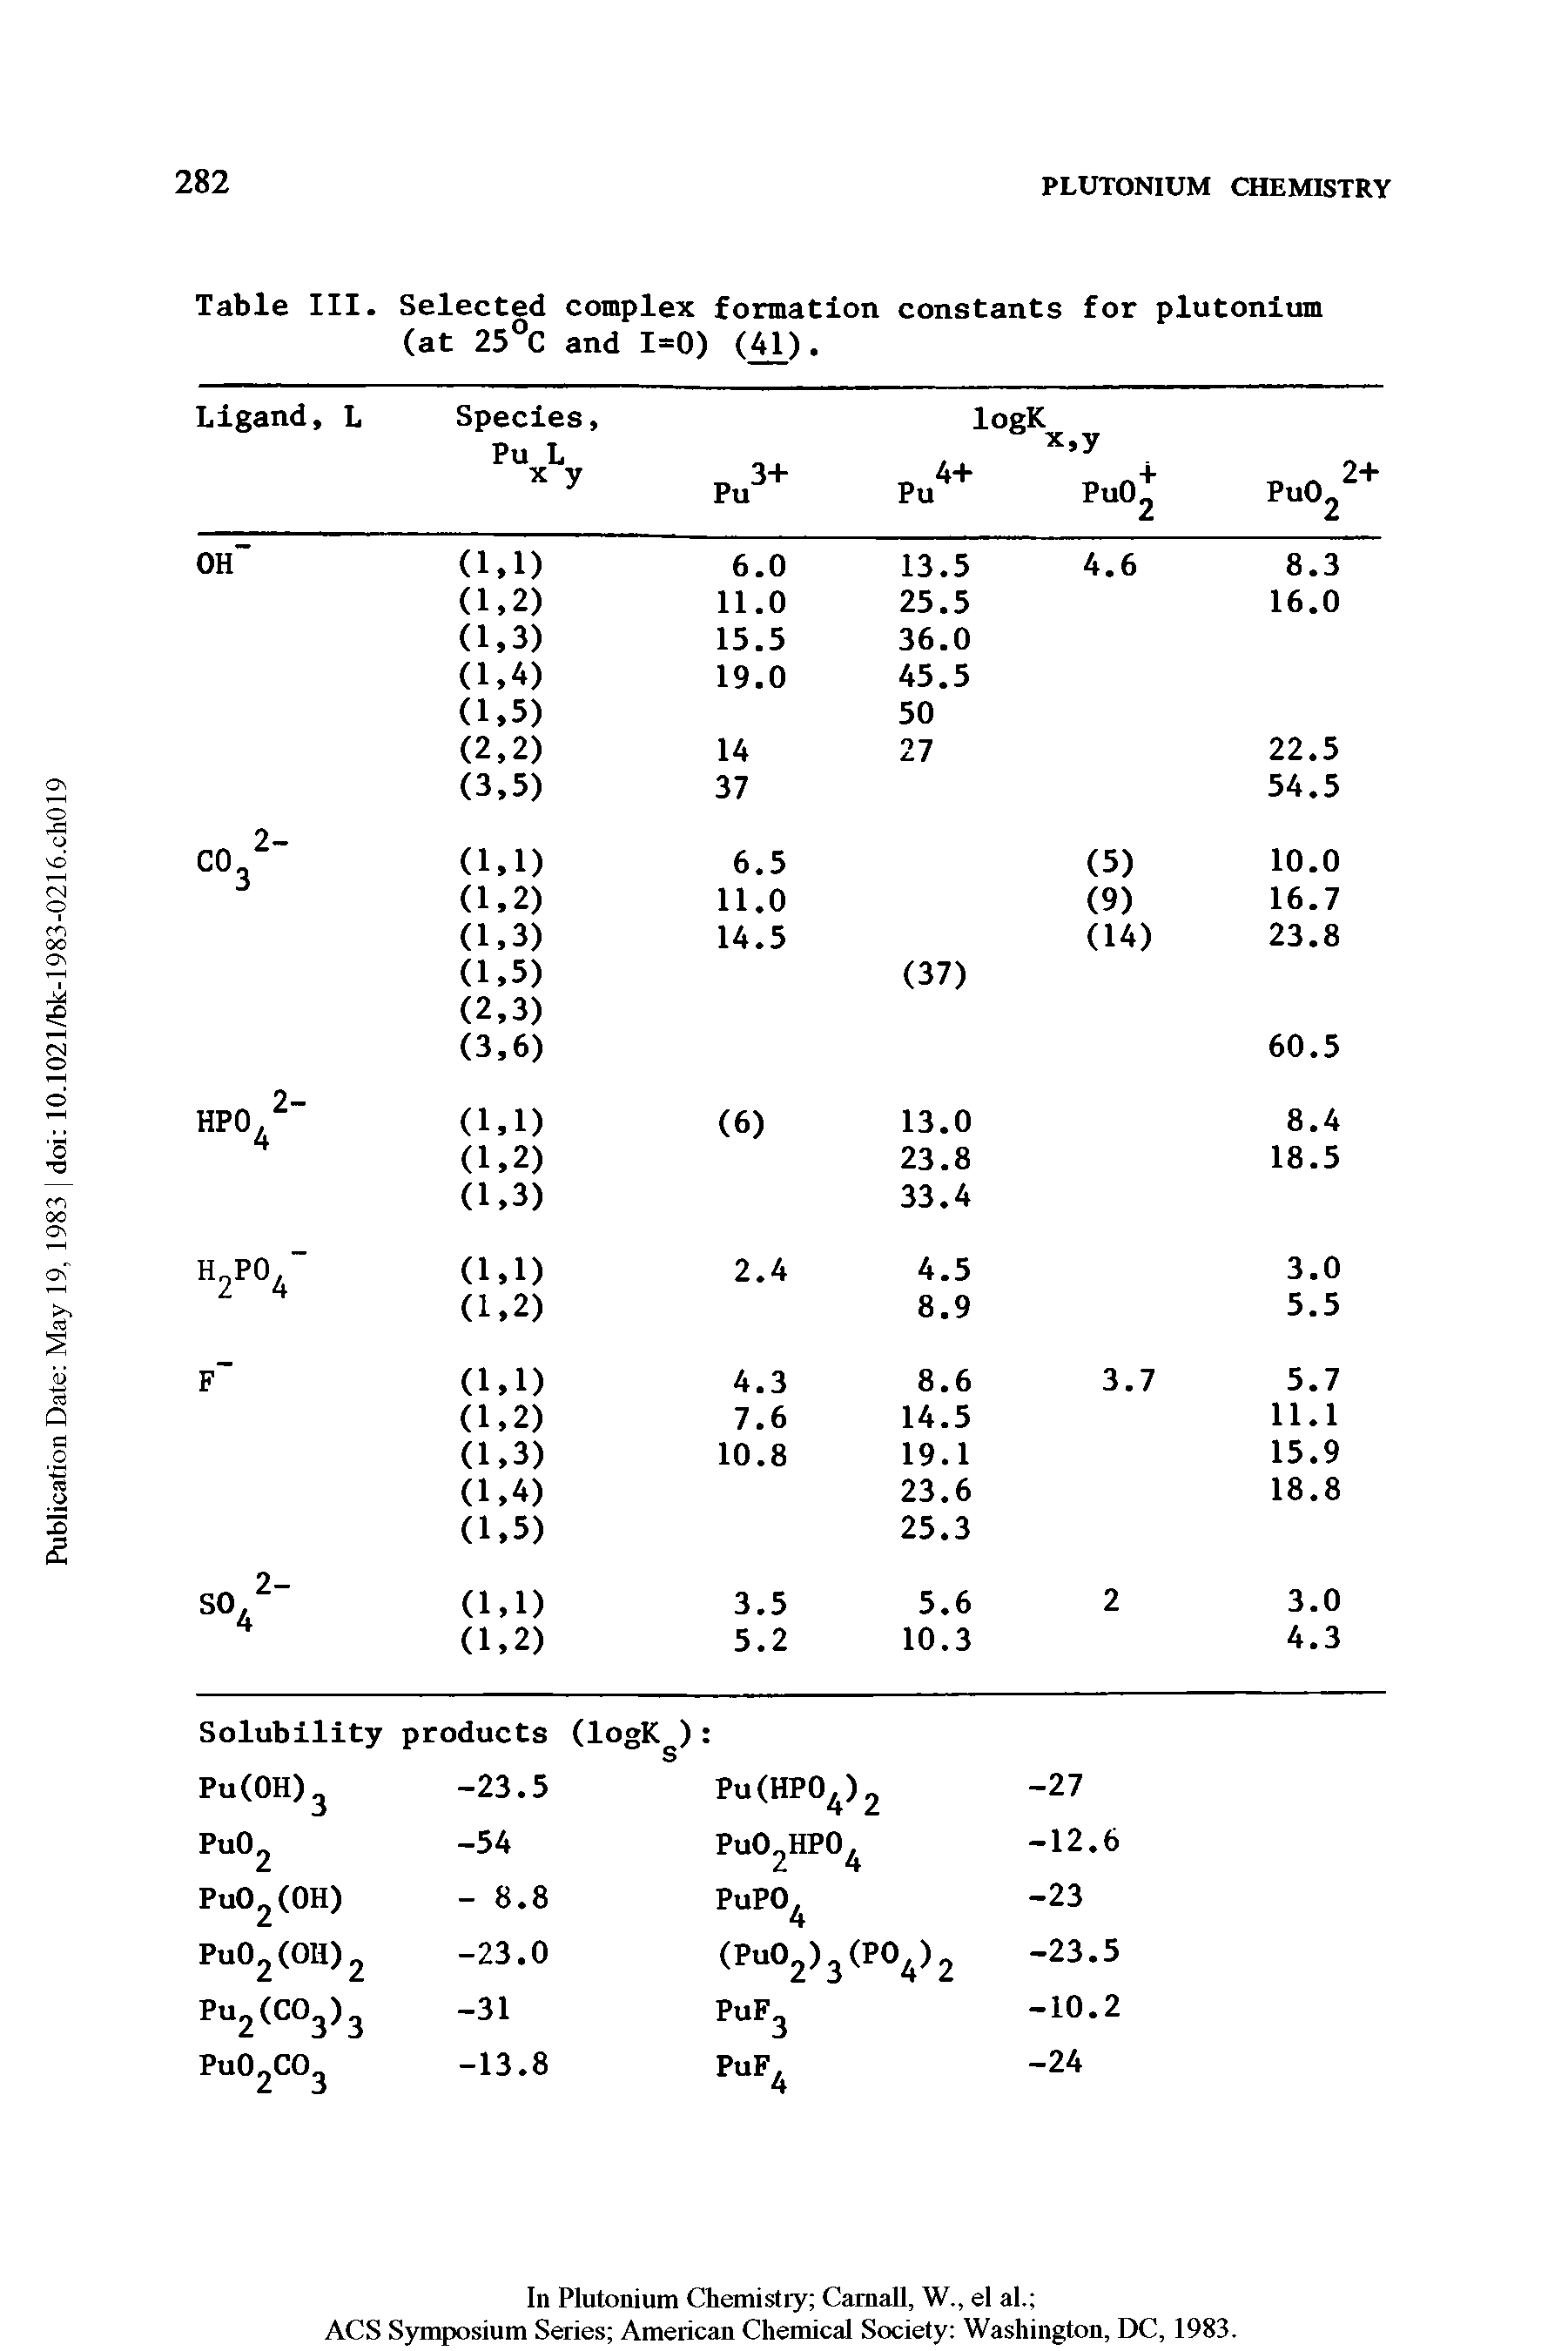 Table III. Selected complex formation constants for plutonium (at 25°C and 1=0) (41).